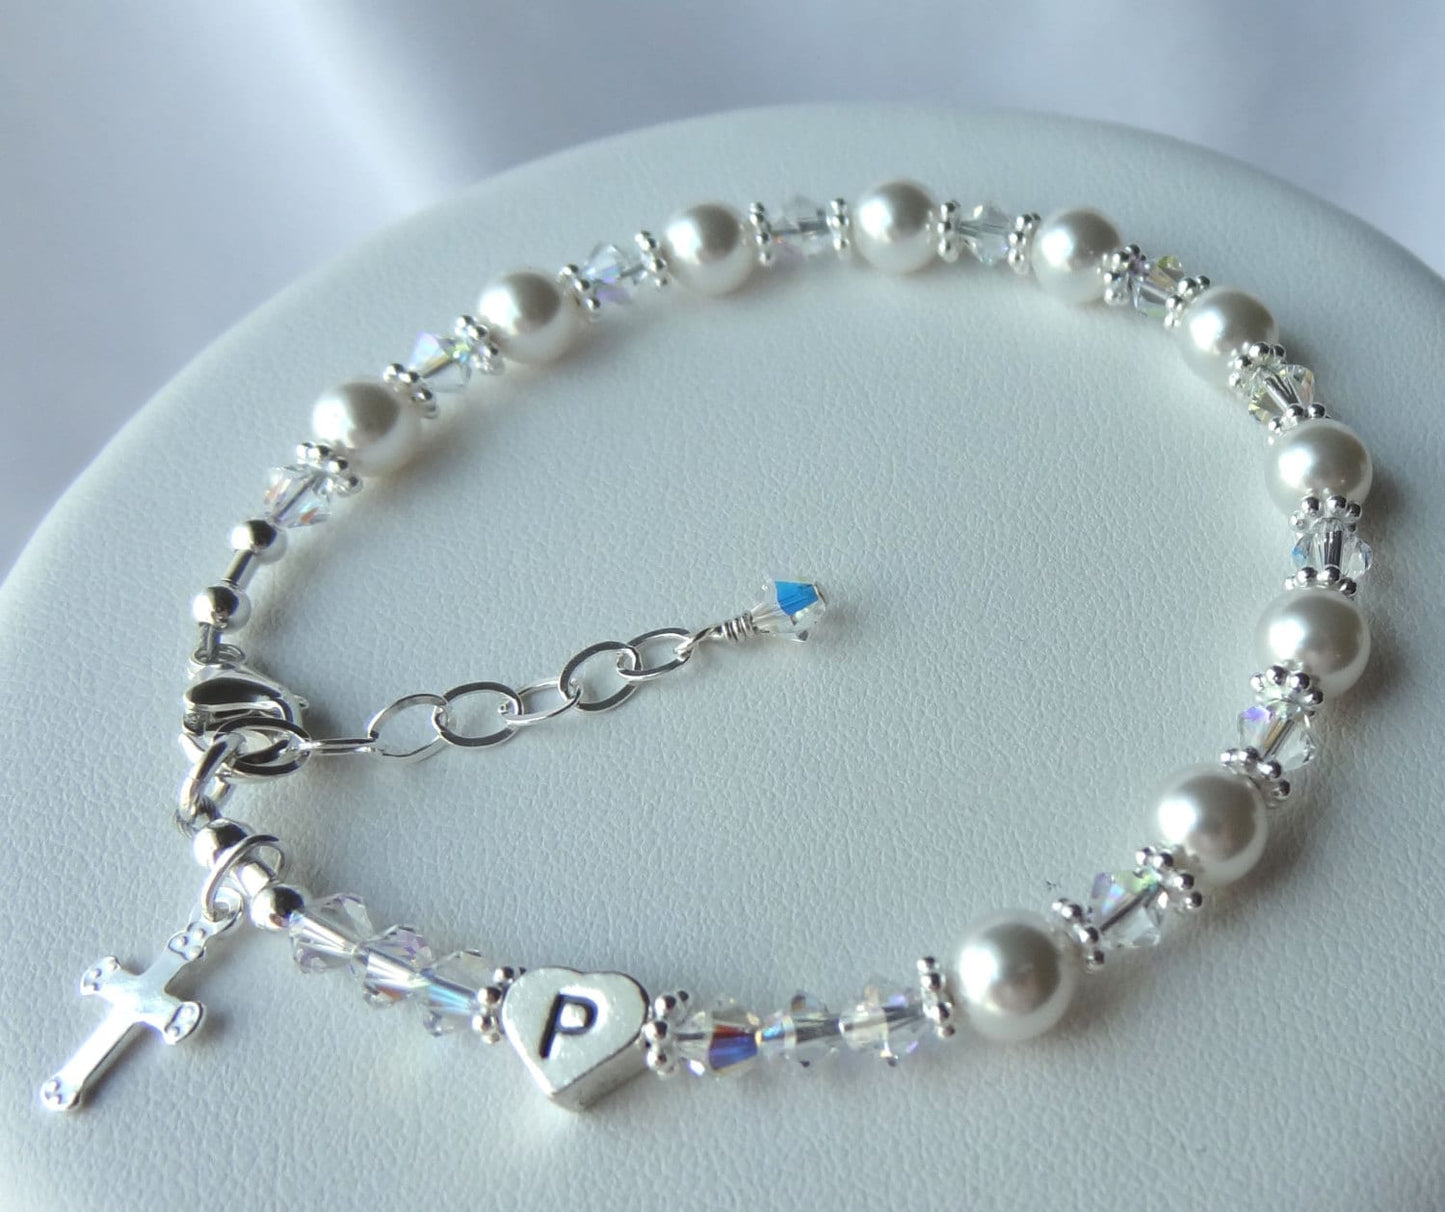 Godmother Pearl Rosary Chaplet Bracelet, Will You Be My Godmother Bracelet, Thank You For Godmother